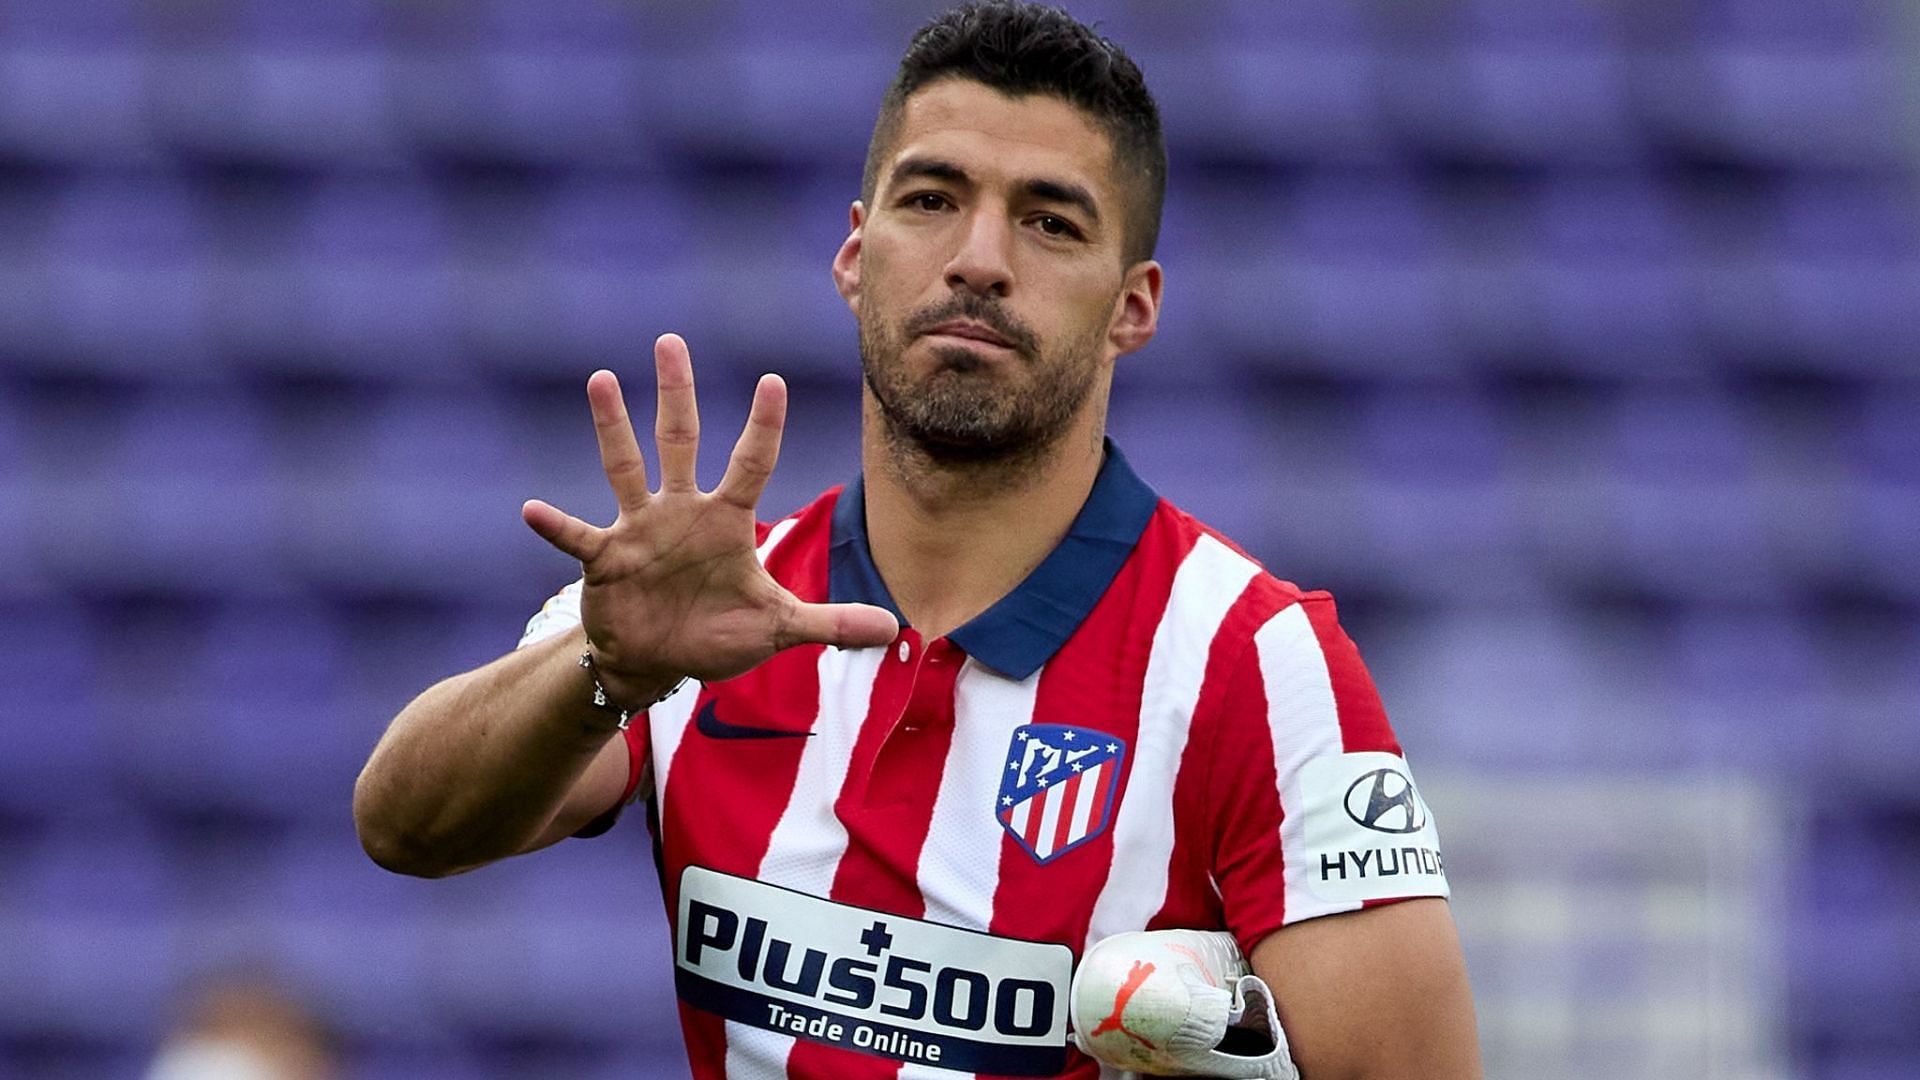 Luis Suarez gesturing towards the camera after scoring for Atletico Madrid.